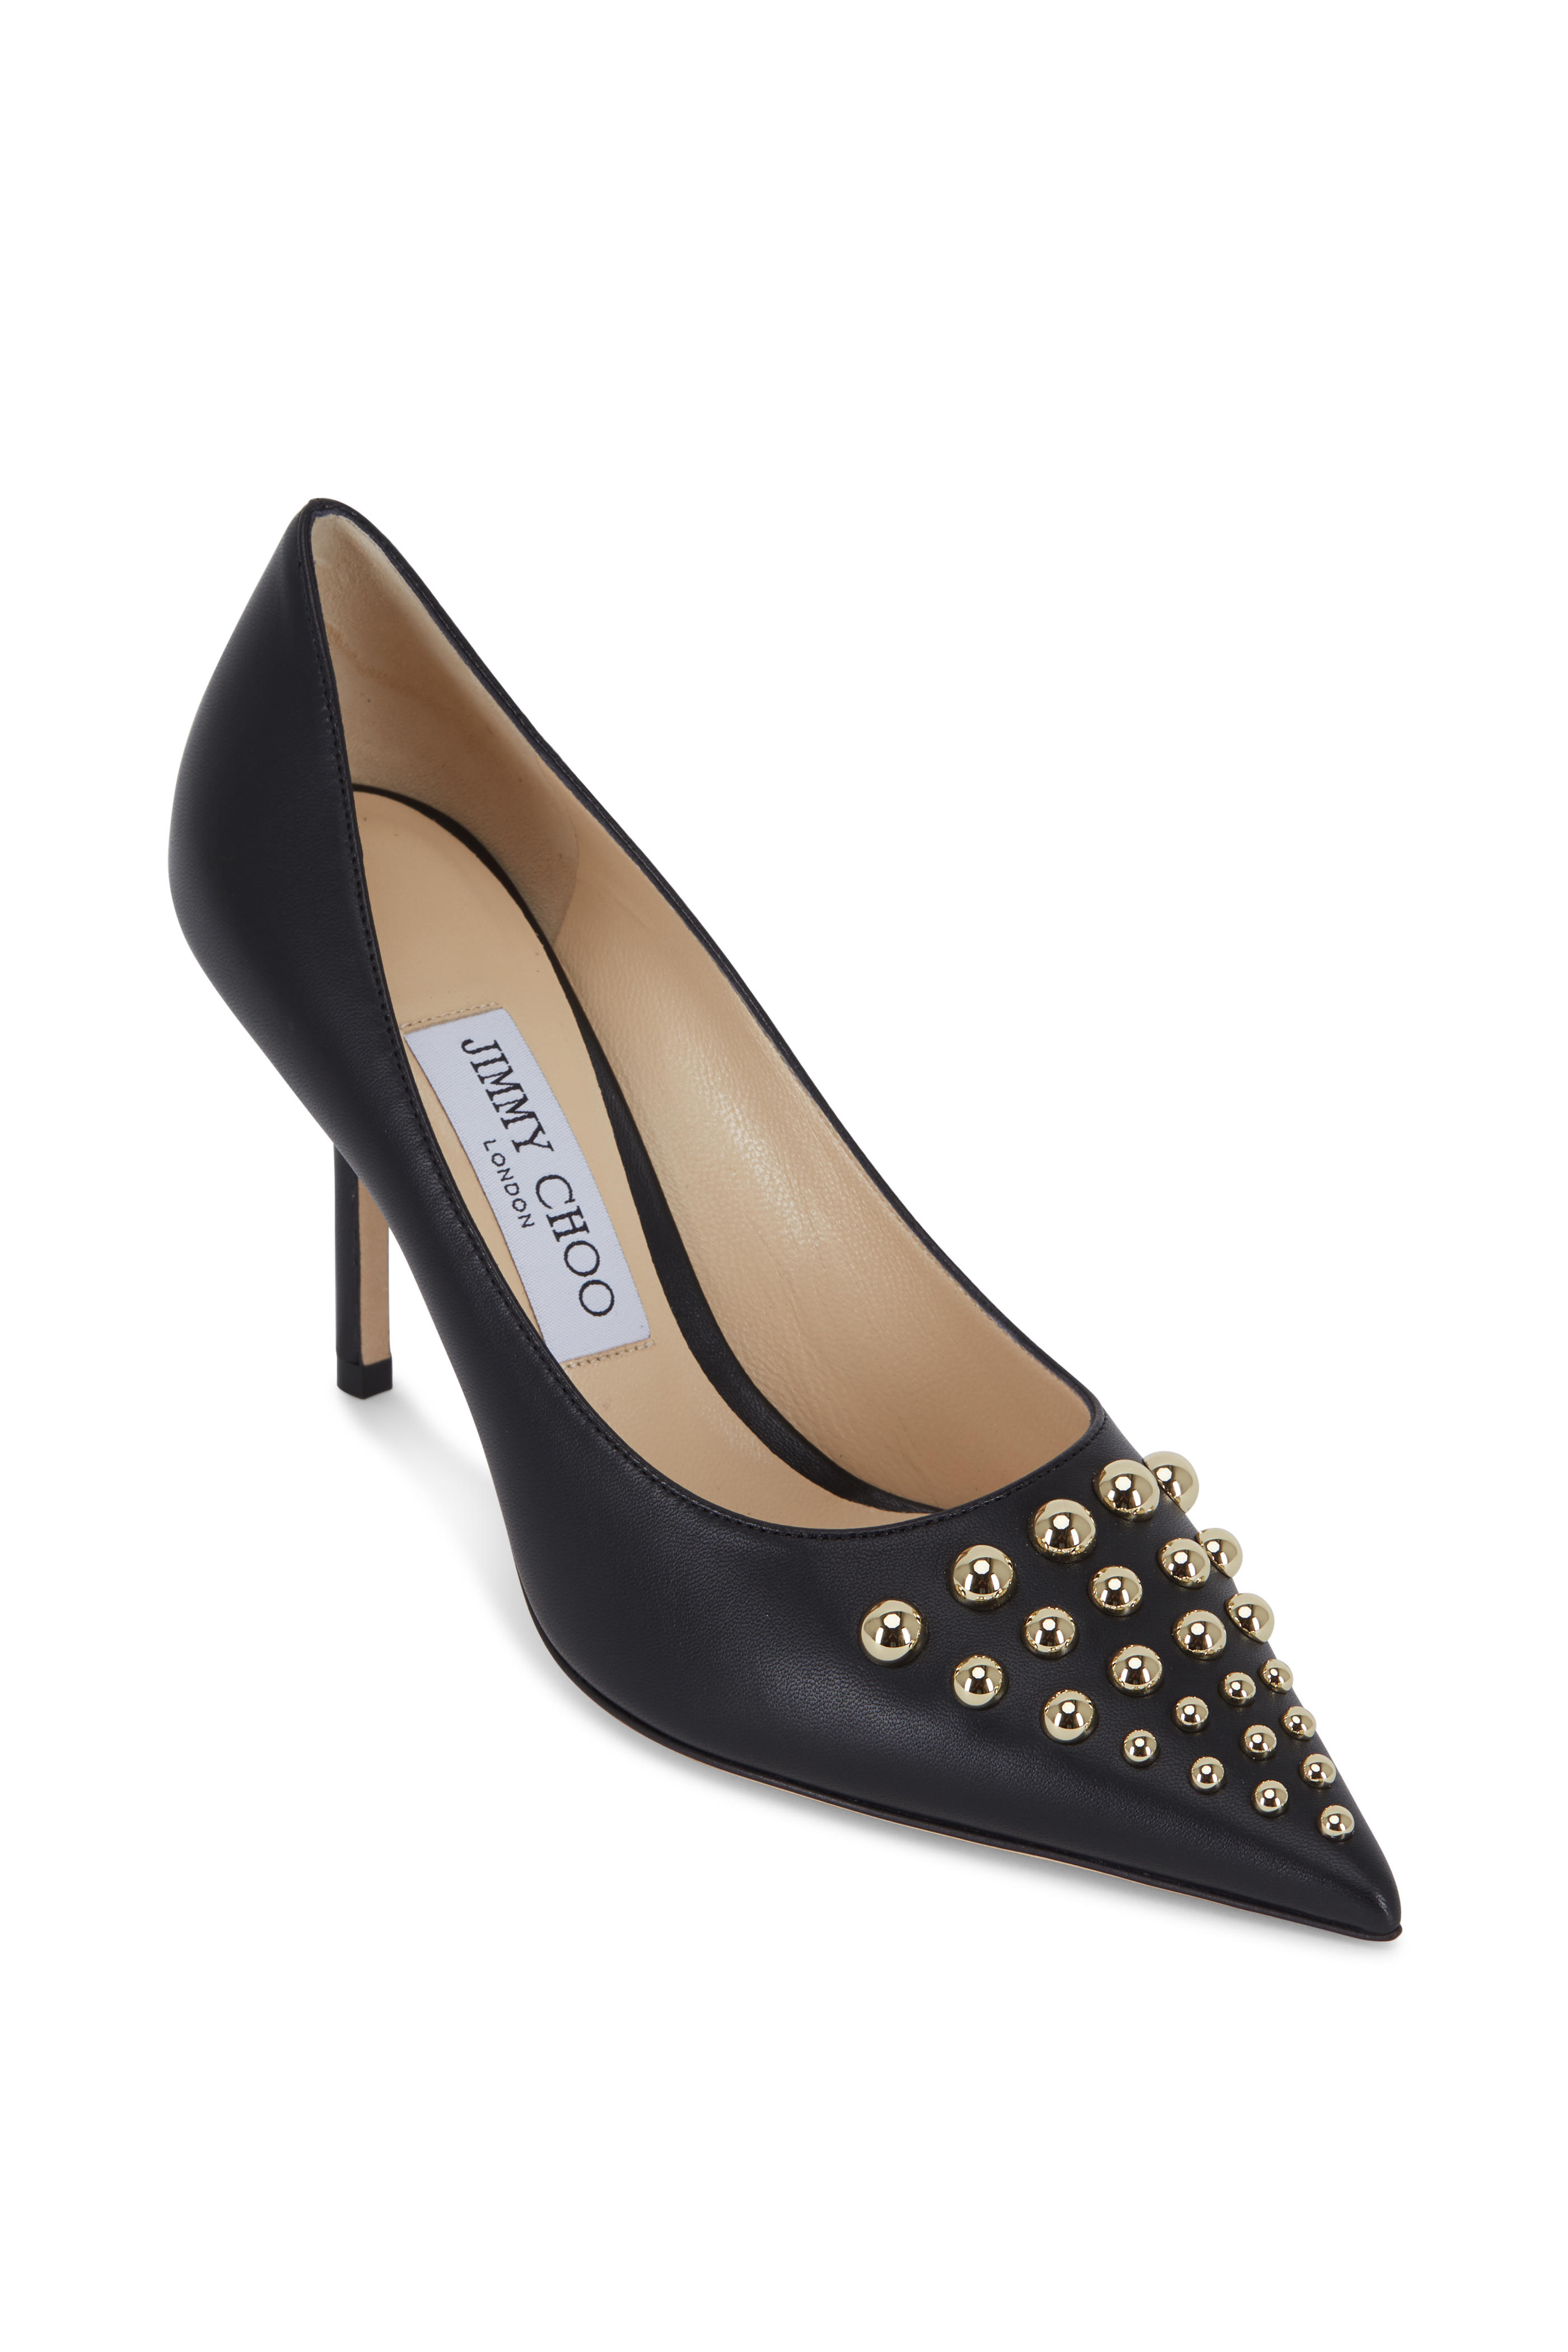 black and gold jimmy choo shoes